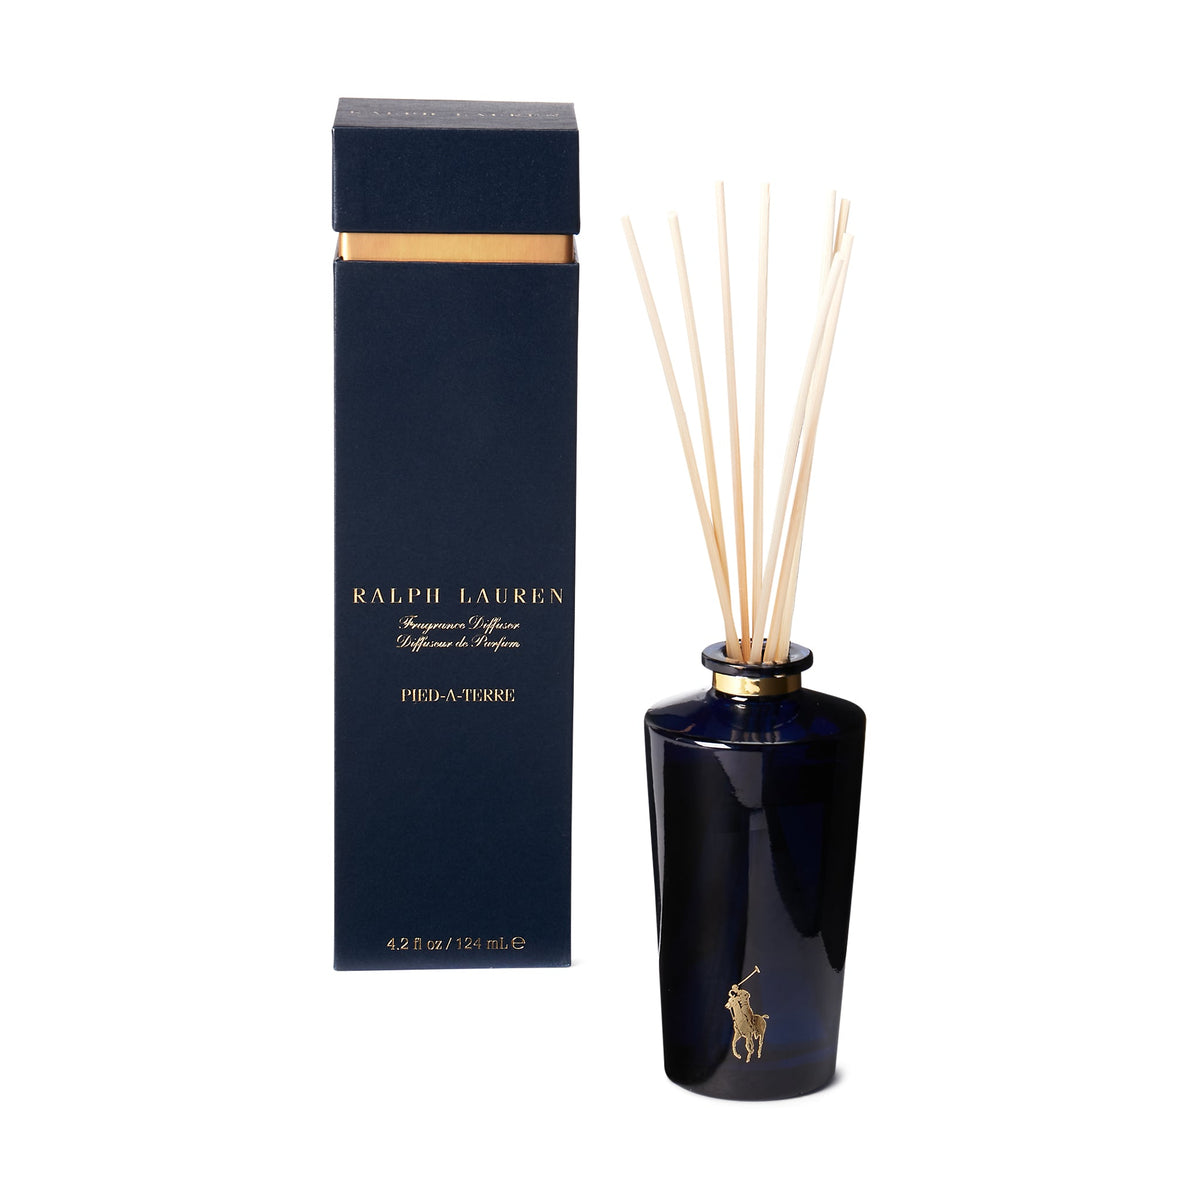 PIED-A-TERRE DIFFUSER NAVY AND GOLD